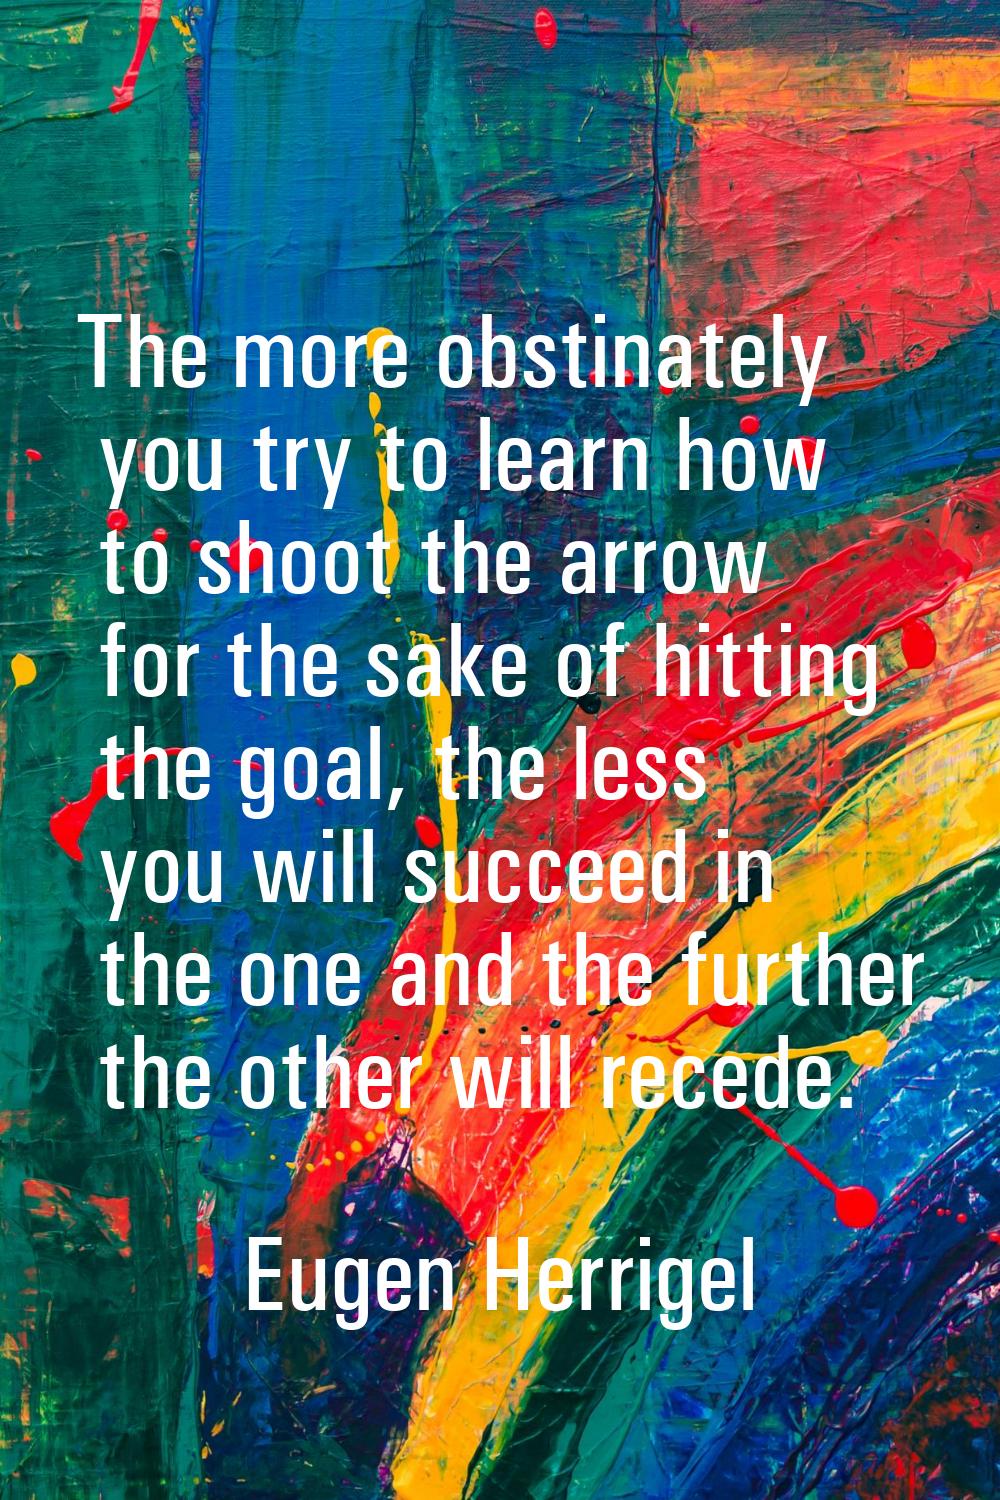 The more obstinately you try to learn how to shoot the arrow for the sake of hitting the goal, the 